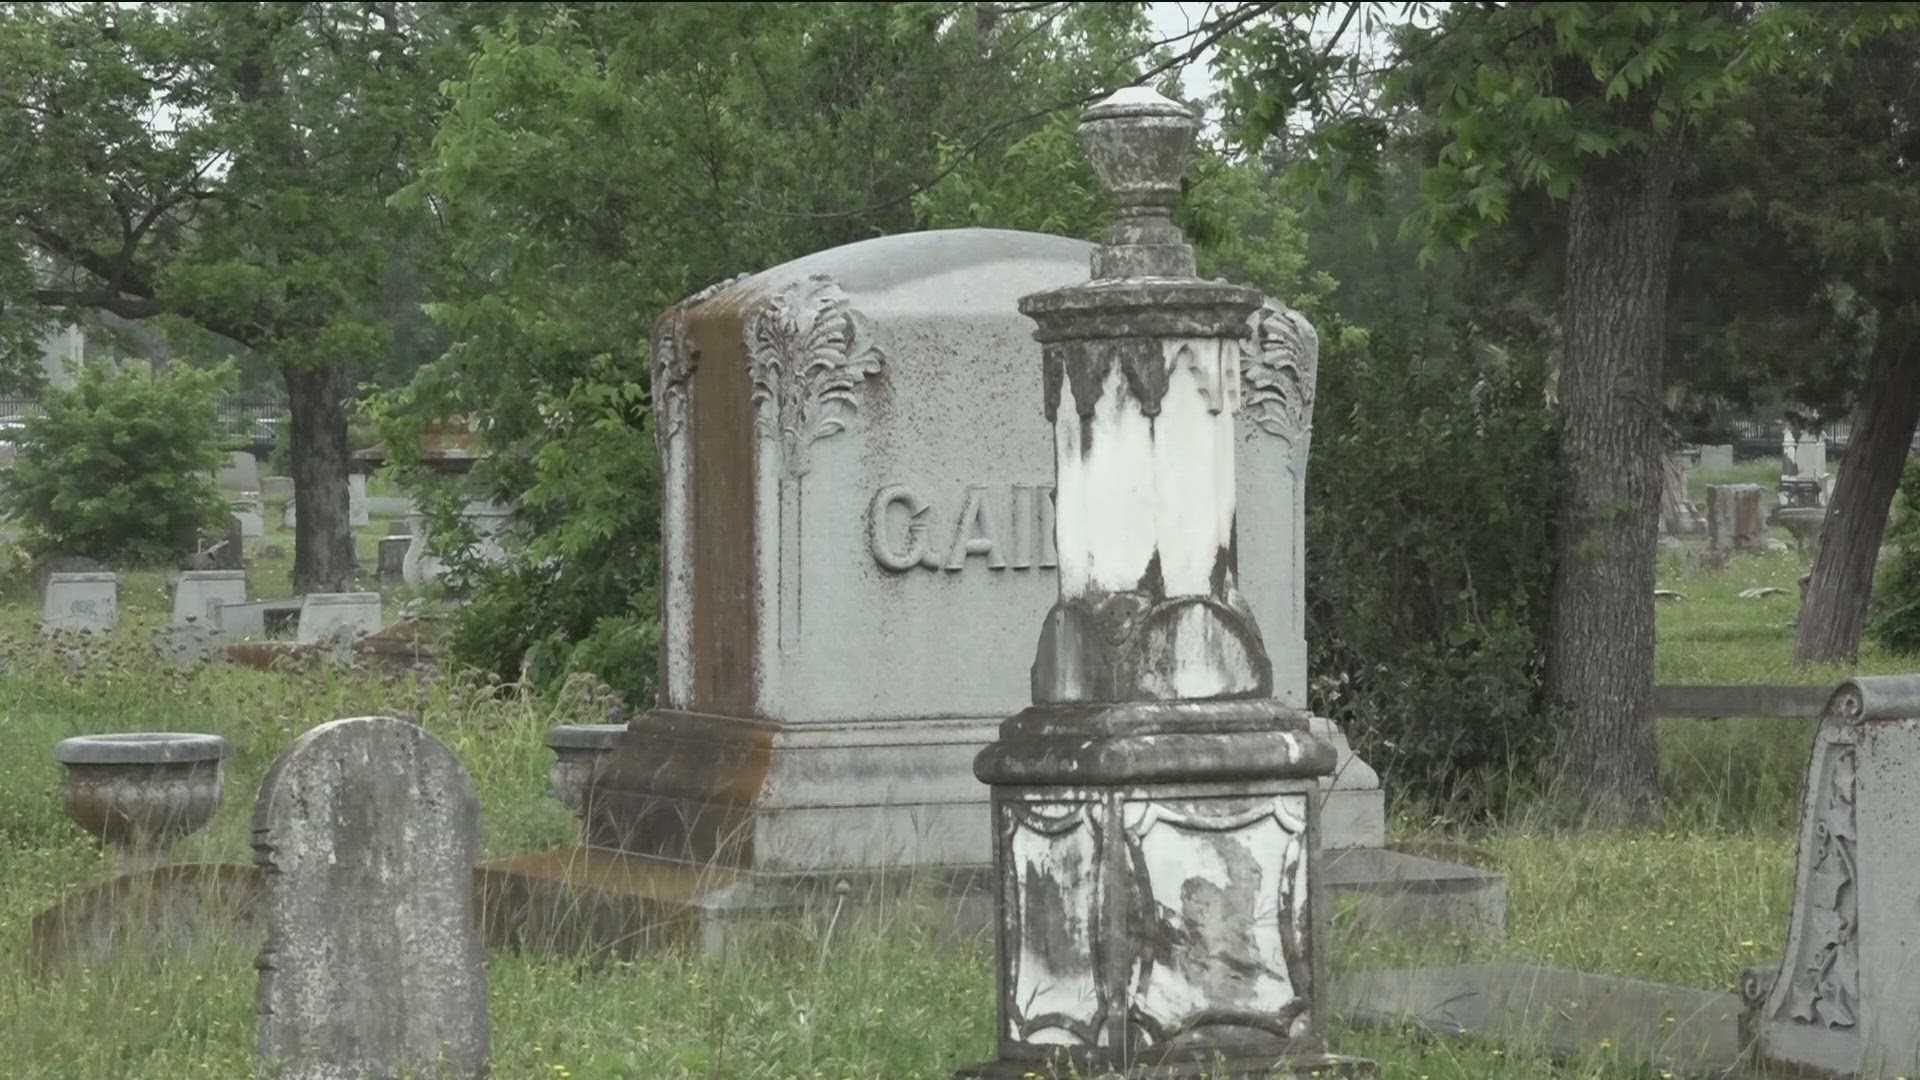 Efforts are being made to educate people about the historical significance of Austin's cemeteries.